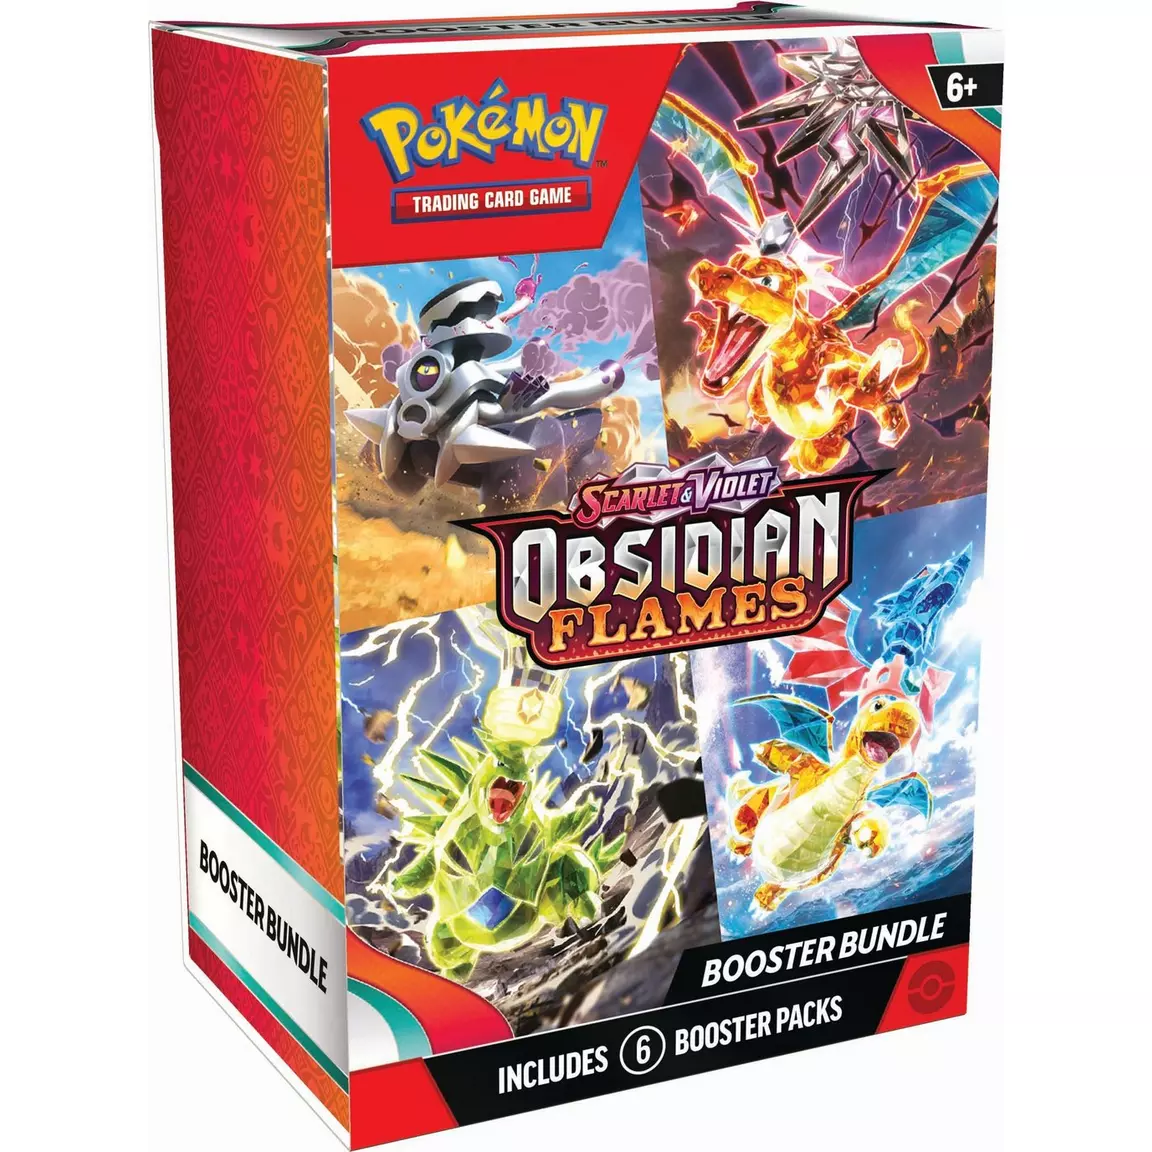 POKEMON Scarlet & Violet: Obsidian Flames Booster Bundle (this is 6 booster packs boxed) – Available/Shipping 8/7